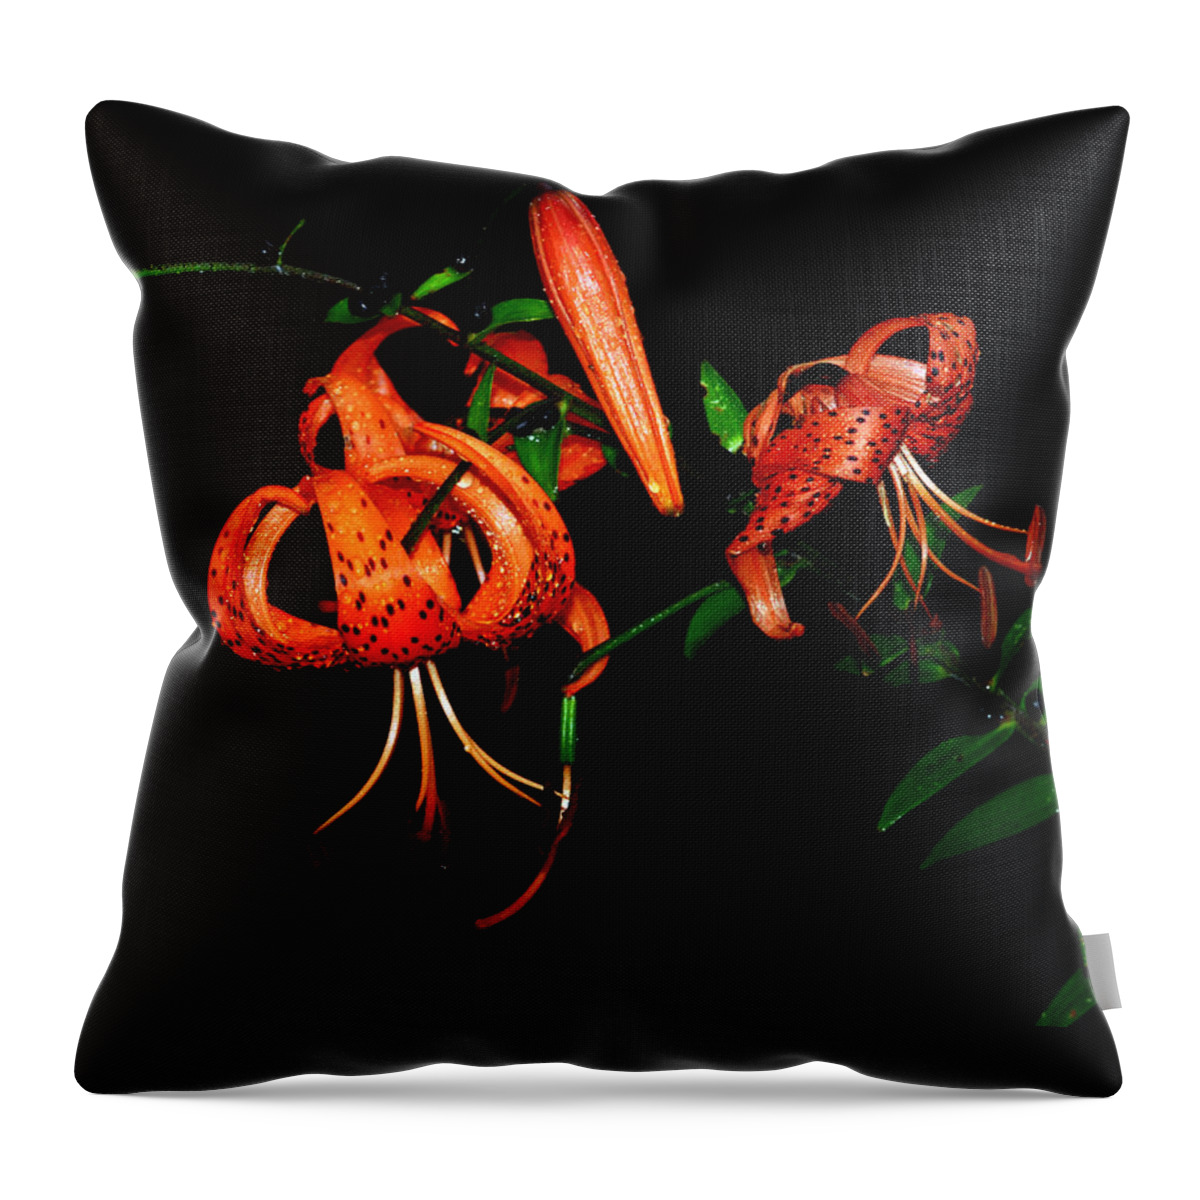 Flowers Throw Pillow featuring the photograph Tiger Lily by Crystal Wightman